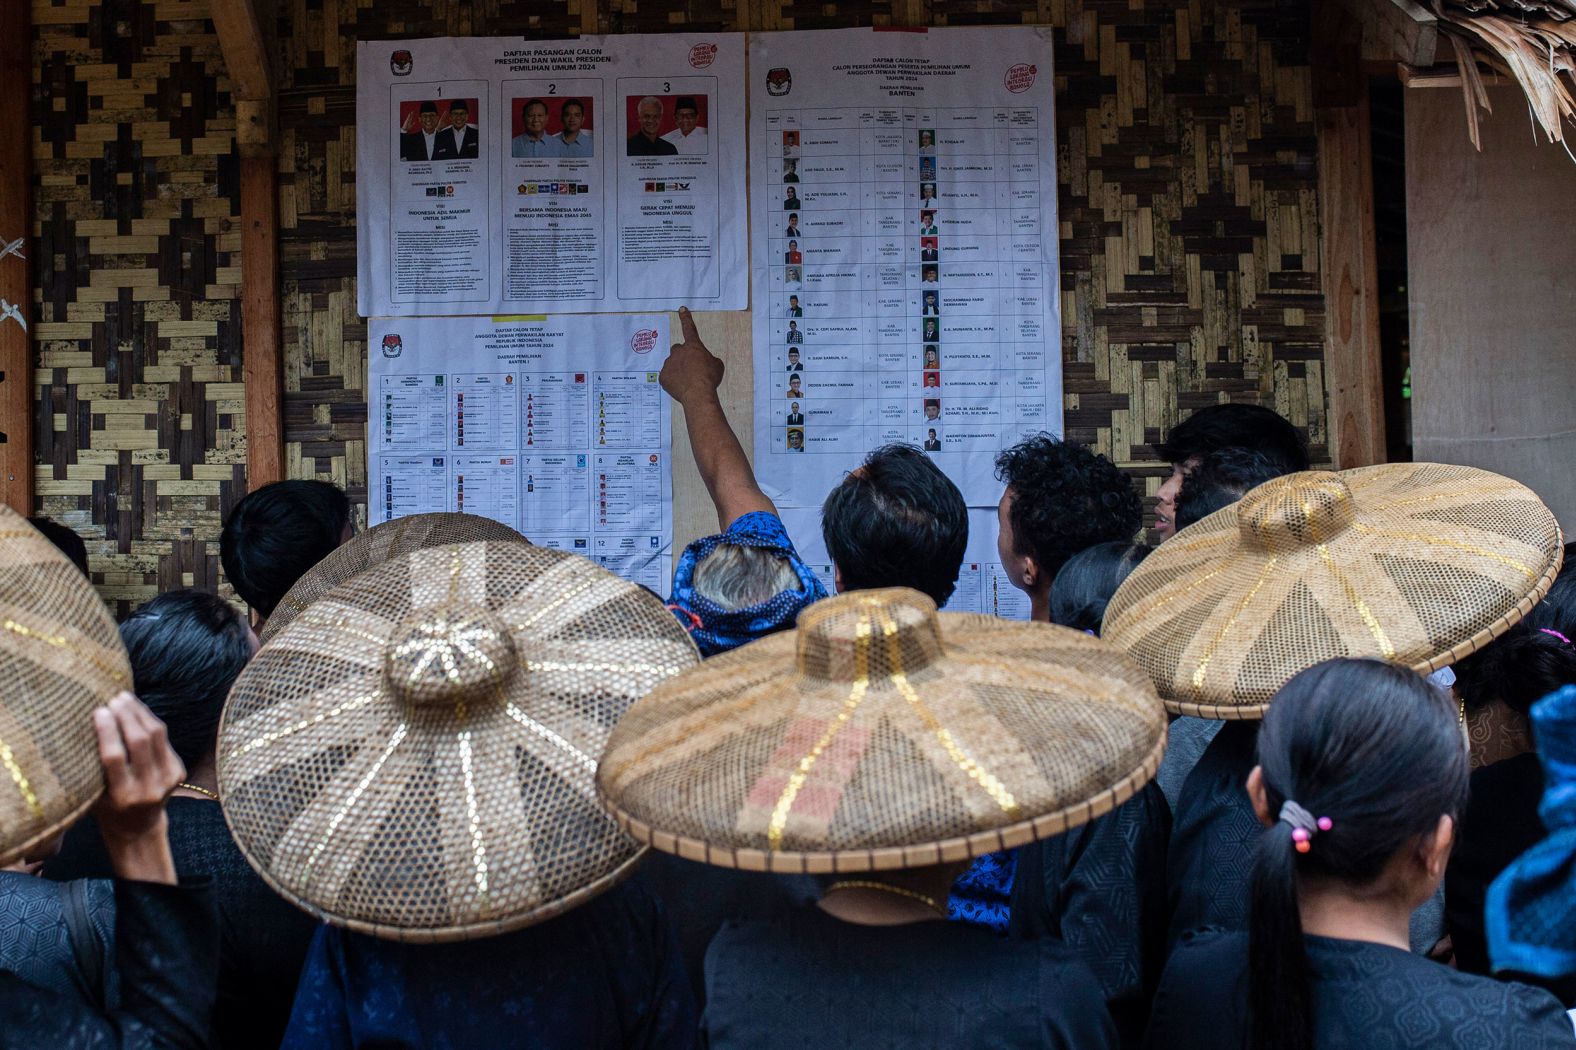 Members of the indigenous Baduy tribe check the candidates list in the Indonesian village of Kanekes before casting their ballot during <a href="index.php?page=&url=https%3A%2F%2Fwww.cnn.com%2F2024%2F02%2F14%2Fasia%2Findonesia-election-prabowo-subianto-intl-hnk%2Findex.html" target="_blank">Indonesia's presidential and legislative elections</a> on Wednesday, February 14.